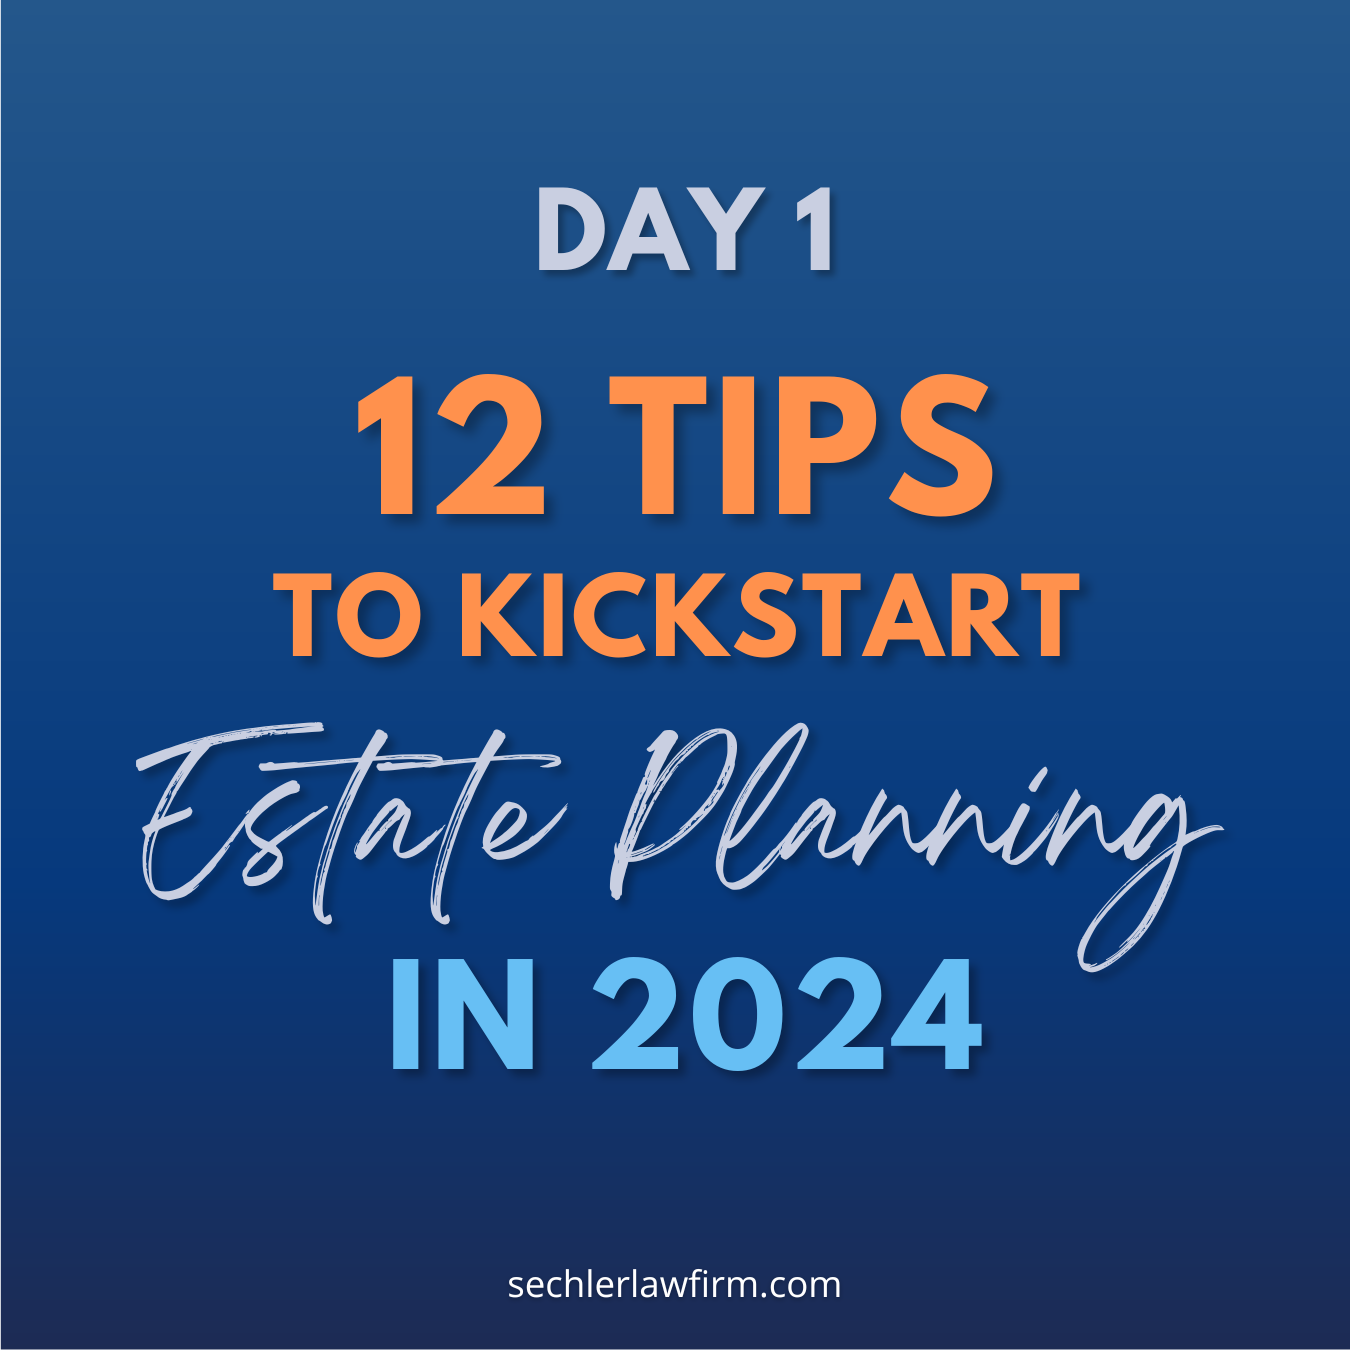 12 Tips to Kickstart your Estate Planning for 2024 – Day 1